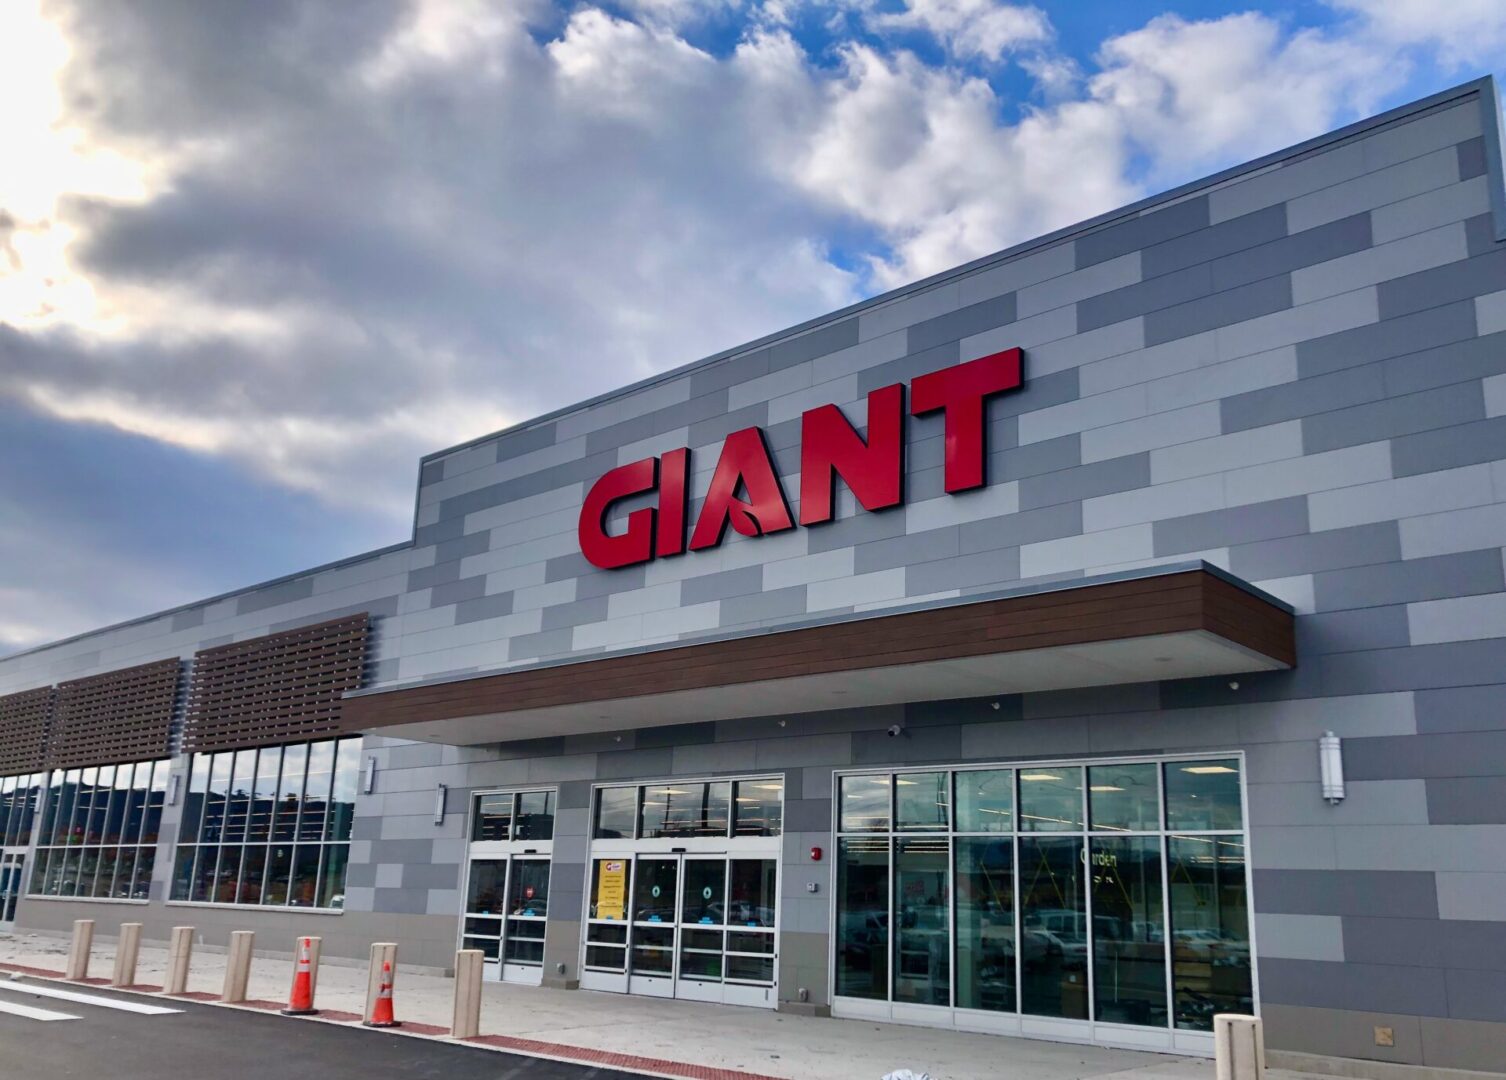 Opening date set for Giant supermarket in Benner Township